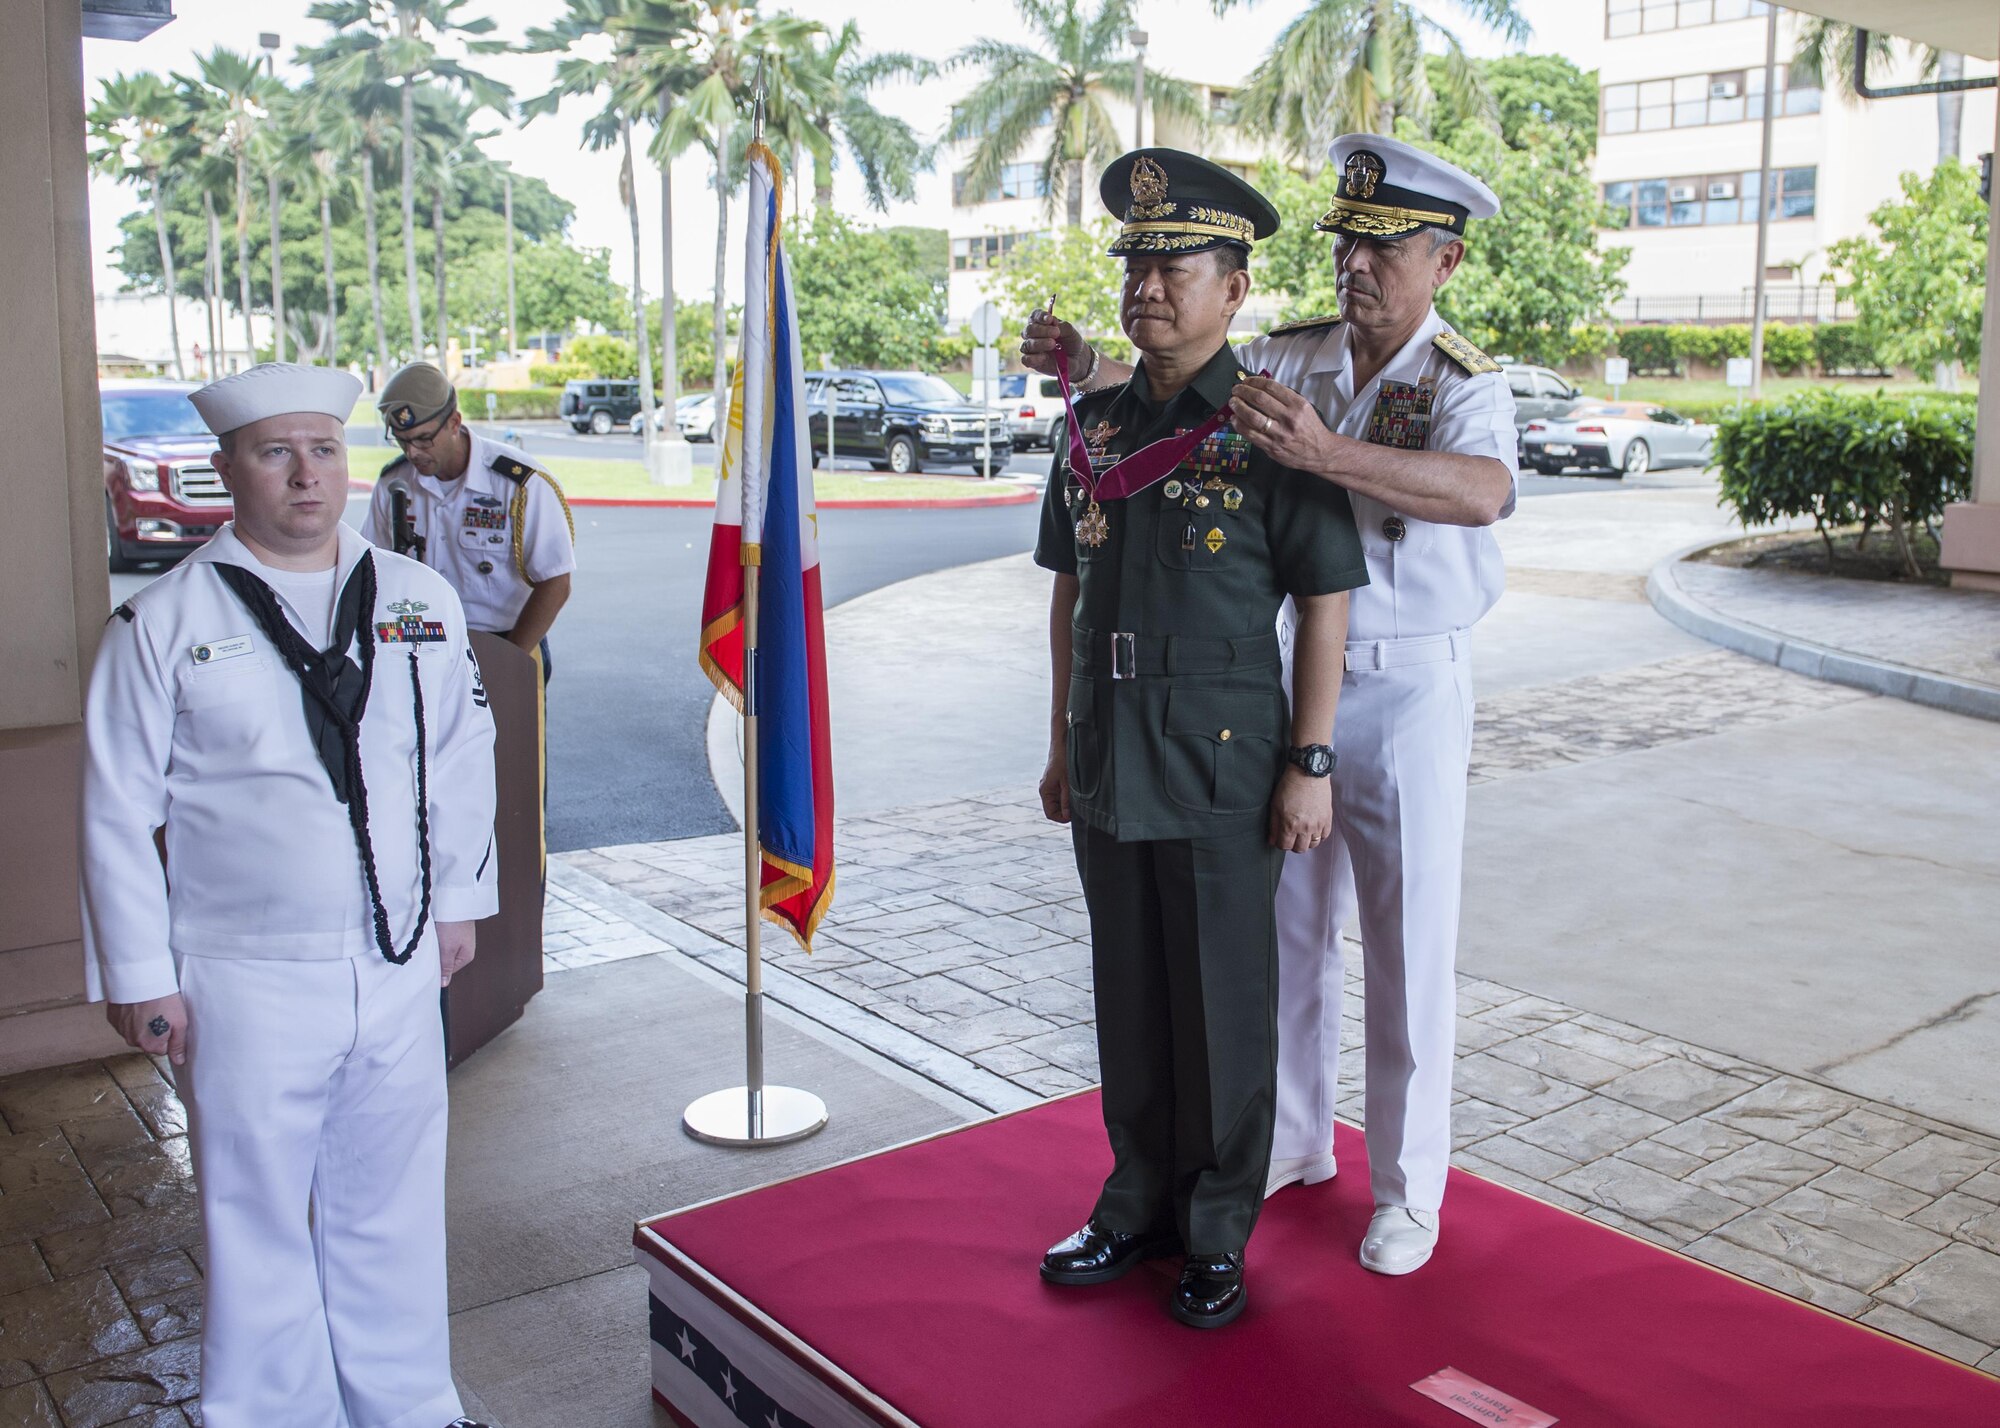 CAMP H.M. SMITH, Hawaii (Sept. 28, 2018)—Adm. Harry Harris, Commander of U.S. Pacific Command (PACOM), presents the Legion of Merit award to Gen. Eduardo Año, Chief of Staff for the Armed Forces of the Philippines, for exceptionally meritorious conduct during an honor ceremony at PACOM headquarters. During Año’s two-day visit to PACOM, he and Harris will meet to discuss changes to the Mutual Defense Board and Security Engagement Board. The Mutual Defense Board provides direct liaison and consultation on military matters of mutual concern to develop and improve both countries’ common defense. The Security Engagement Board provides the framework and mechanism for continuing liaison and consultation on non-traditional threats to security such as terrorism, transnational crimes, maritime security, and natural and man-made disasters. (U.S. Navy photo by Mass Communication Specialist 2nd Class James Mullen/Released)